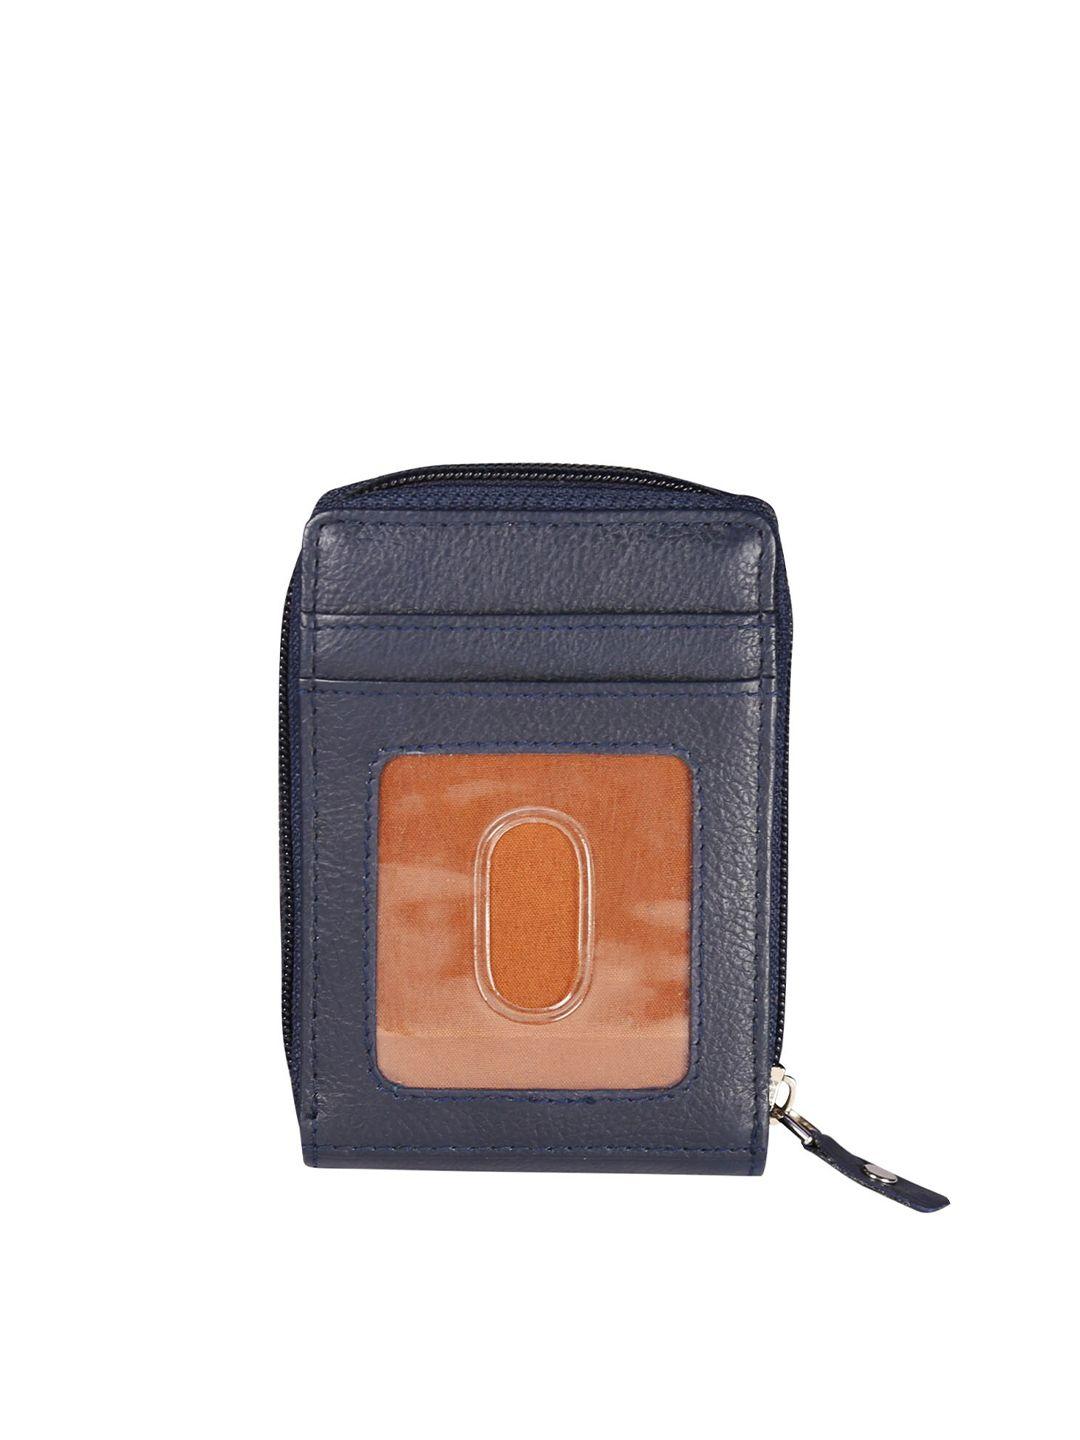 style shoes zip detail leather stylish credit card holder